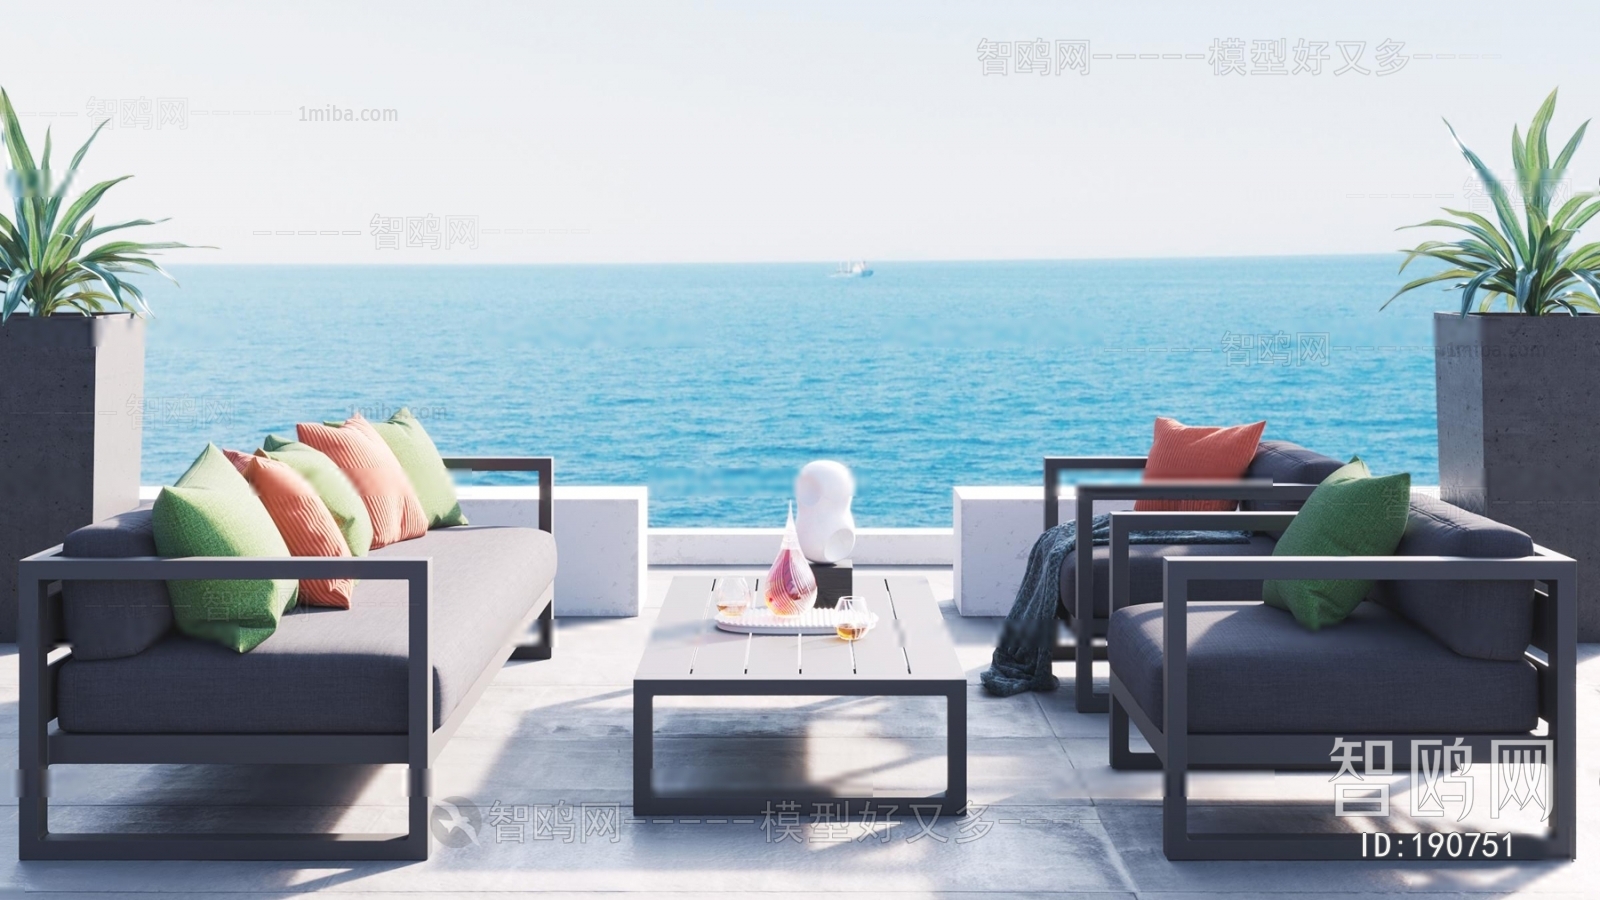 New Chinese Style Outdoor Sofa